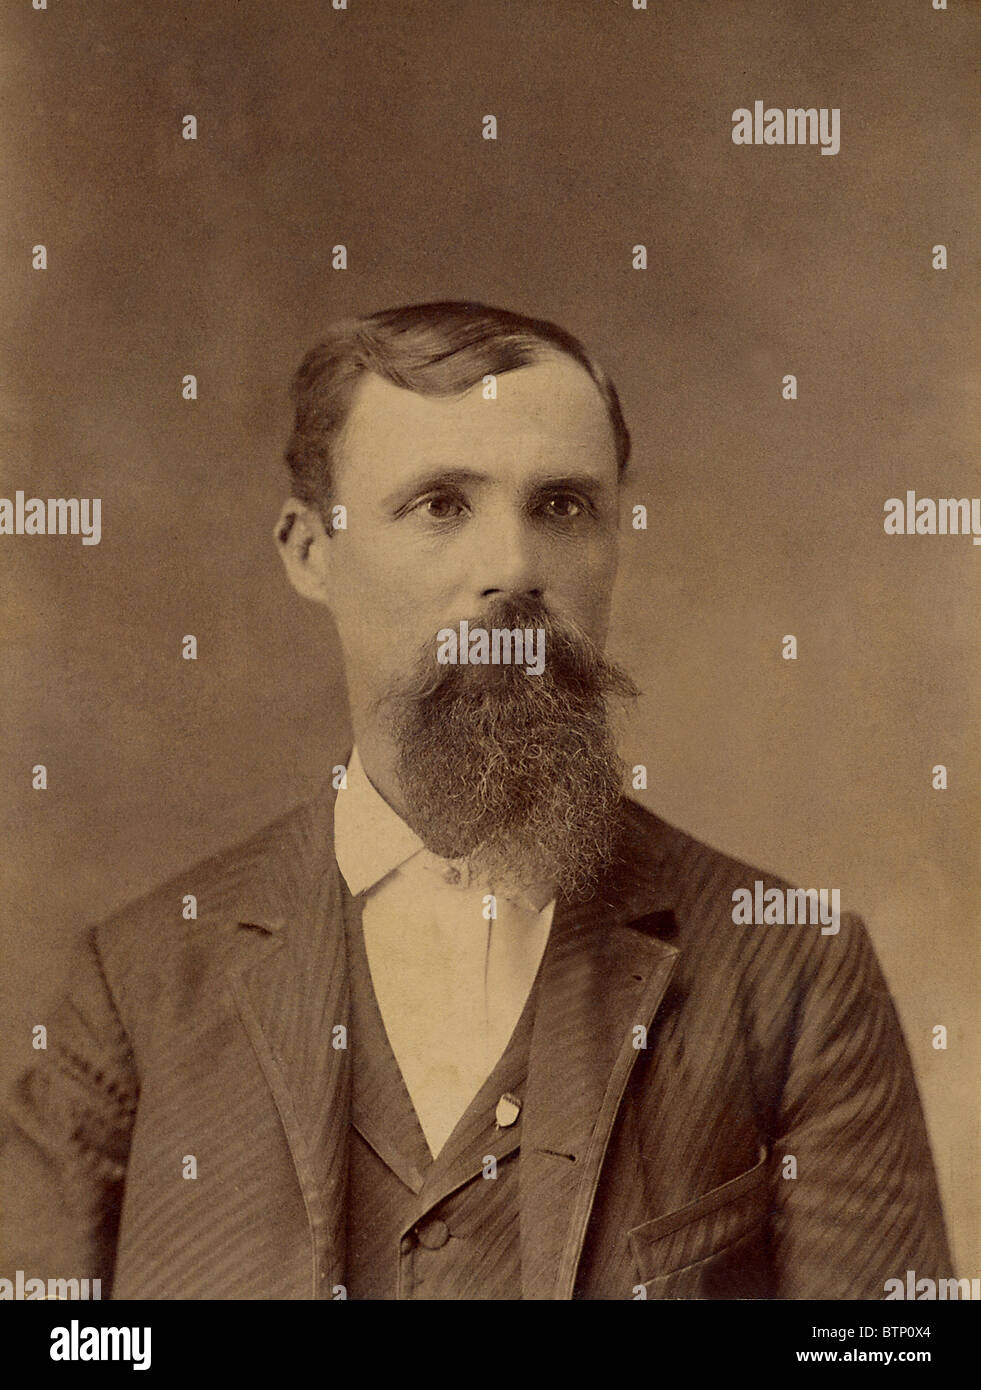 1800's vintage antique portrait photo of a gentleman wearing a suit with a long beard. The photograph is yellowed with age Stock Photo